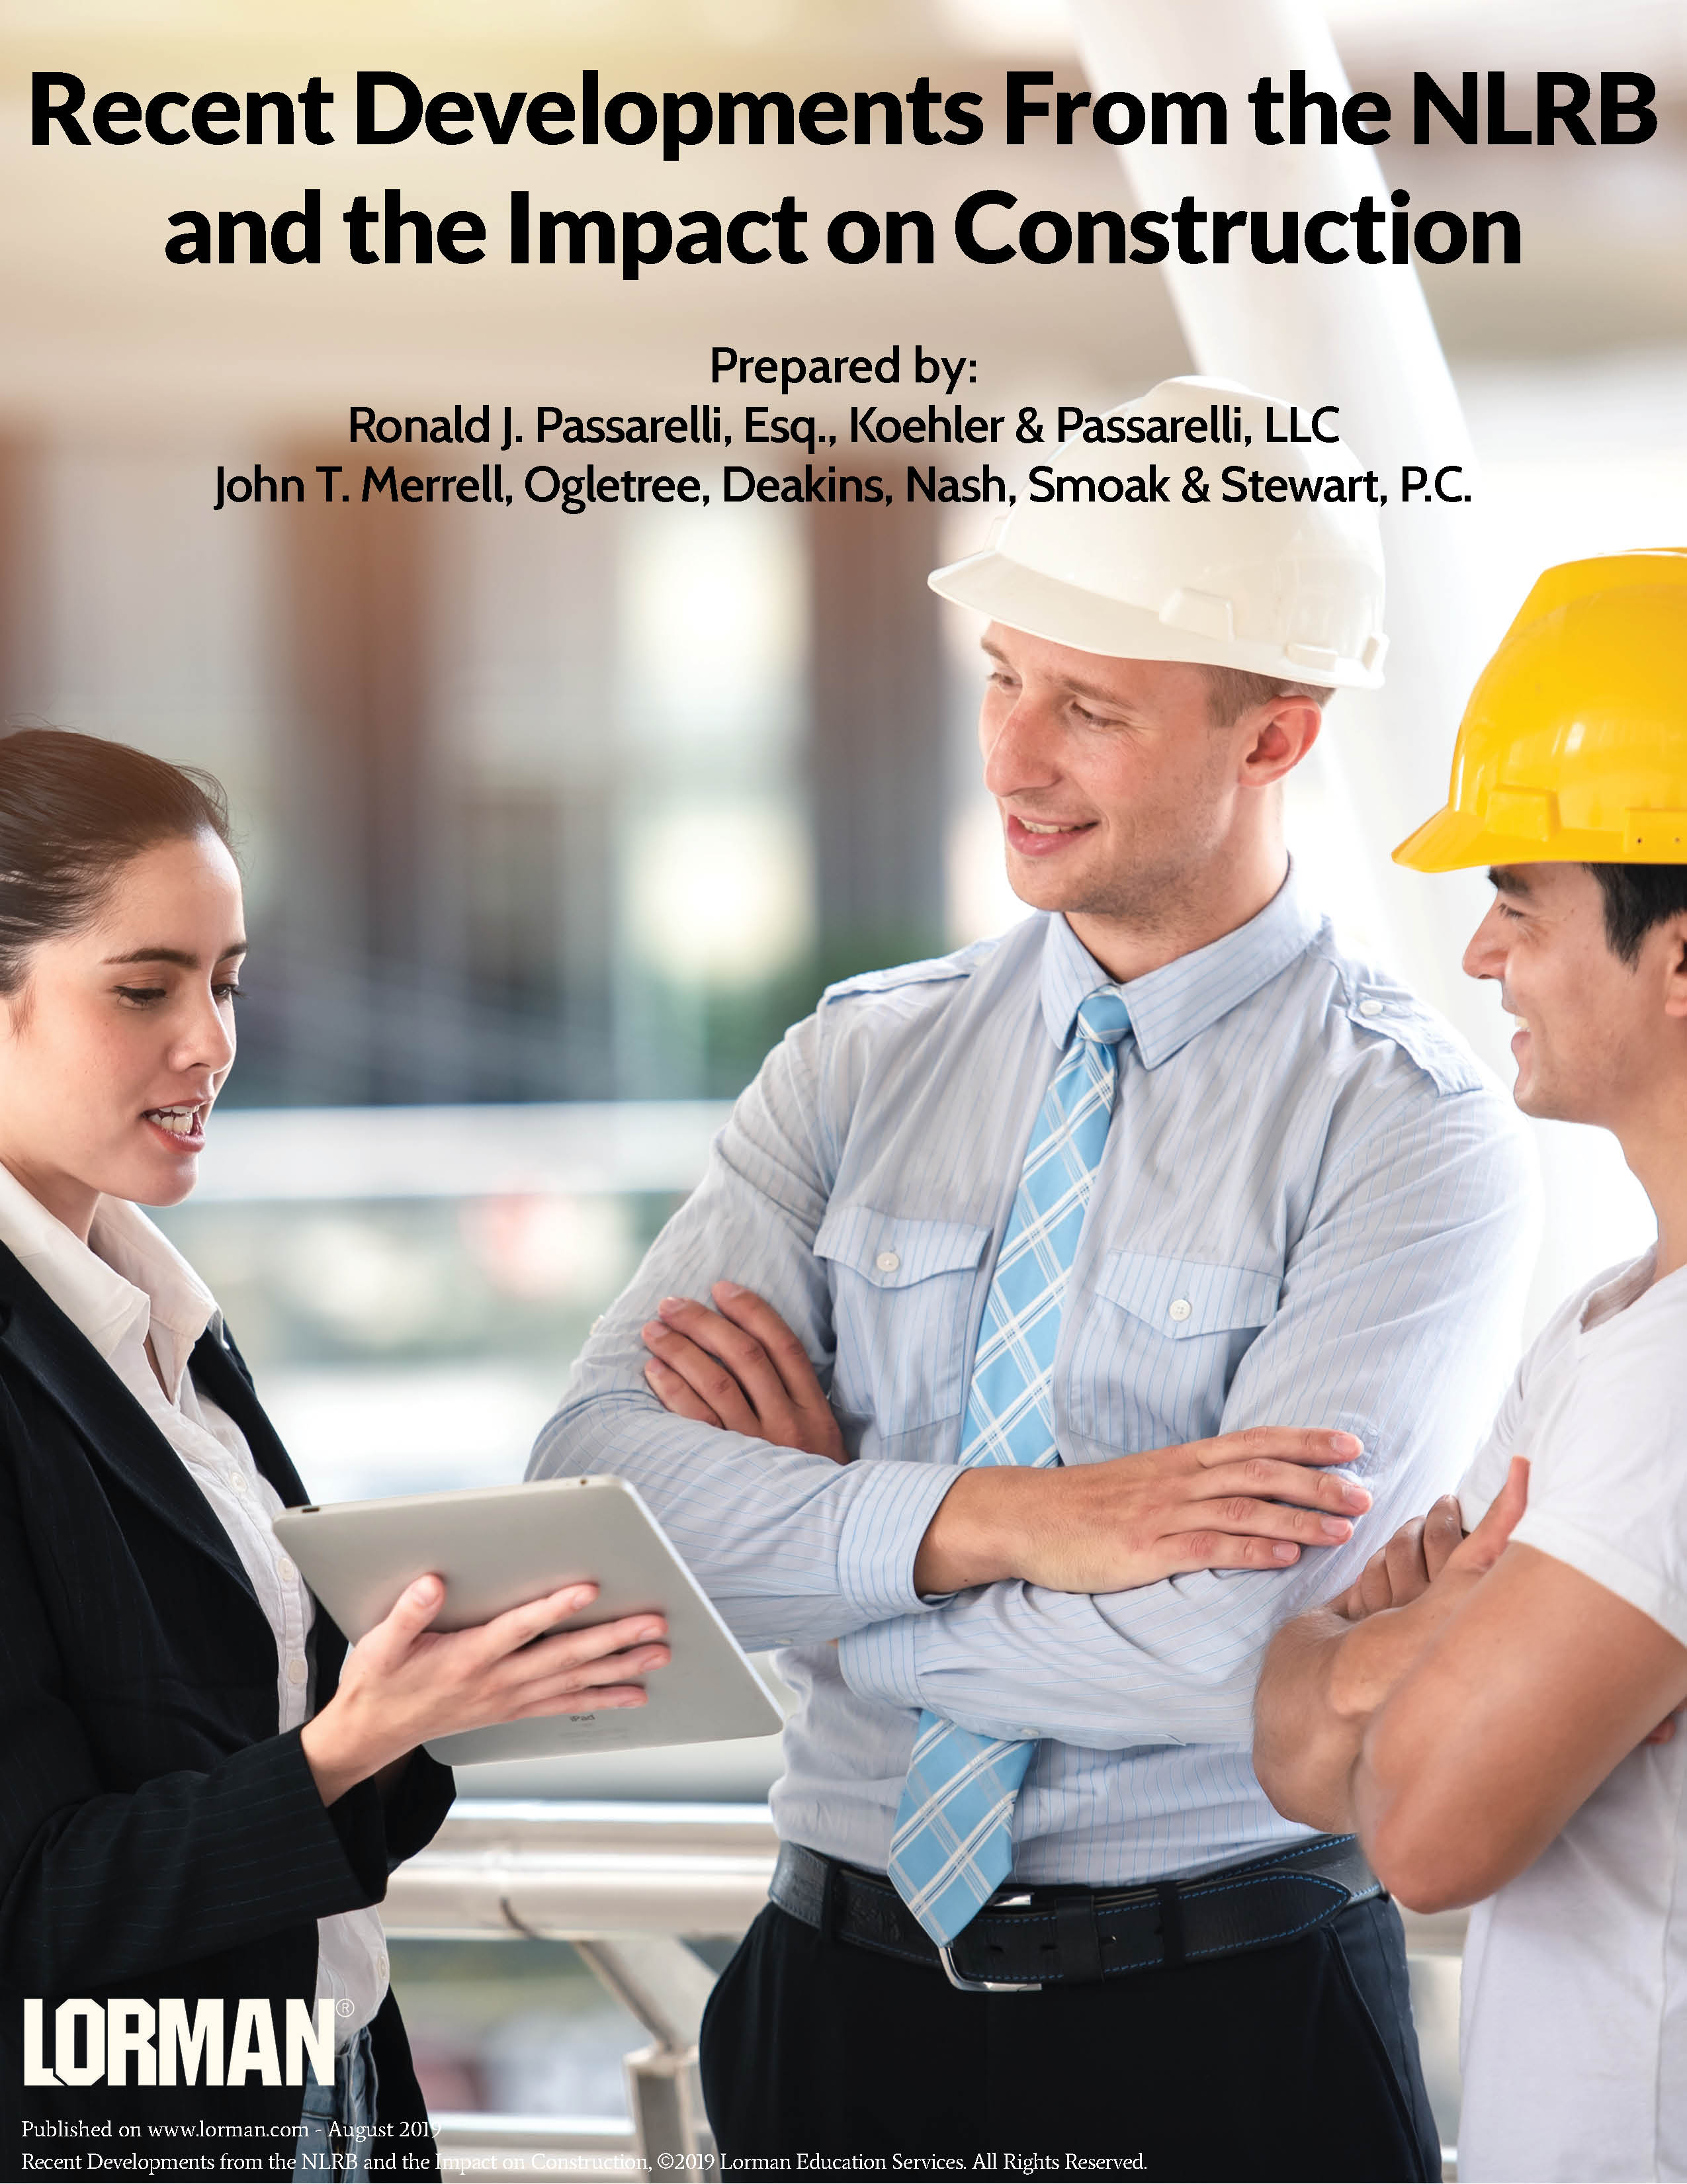 Recent Developments From the NLRB and the Impact on Construction